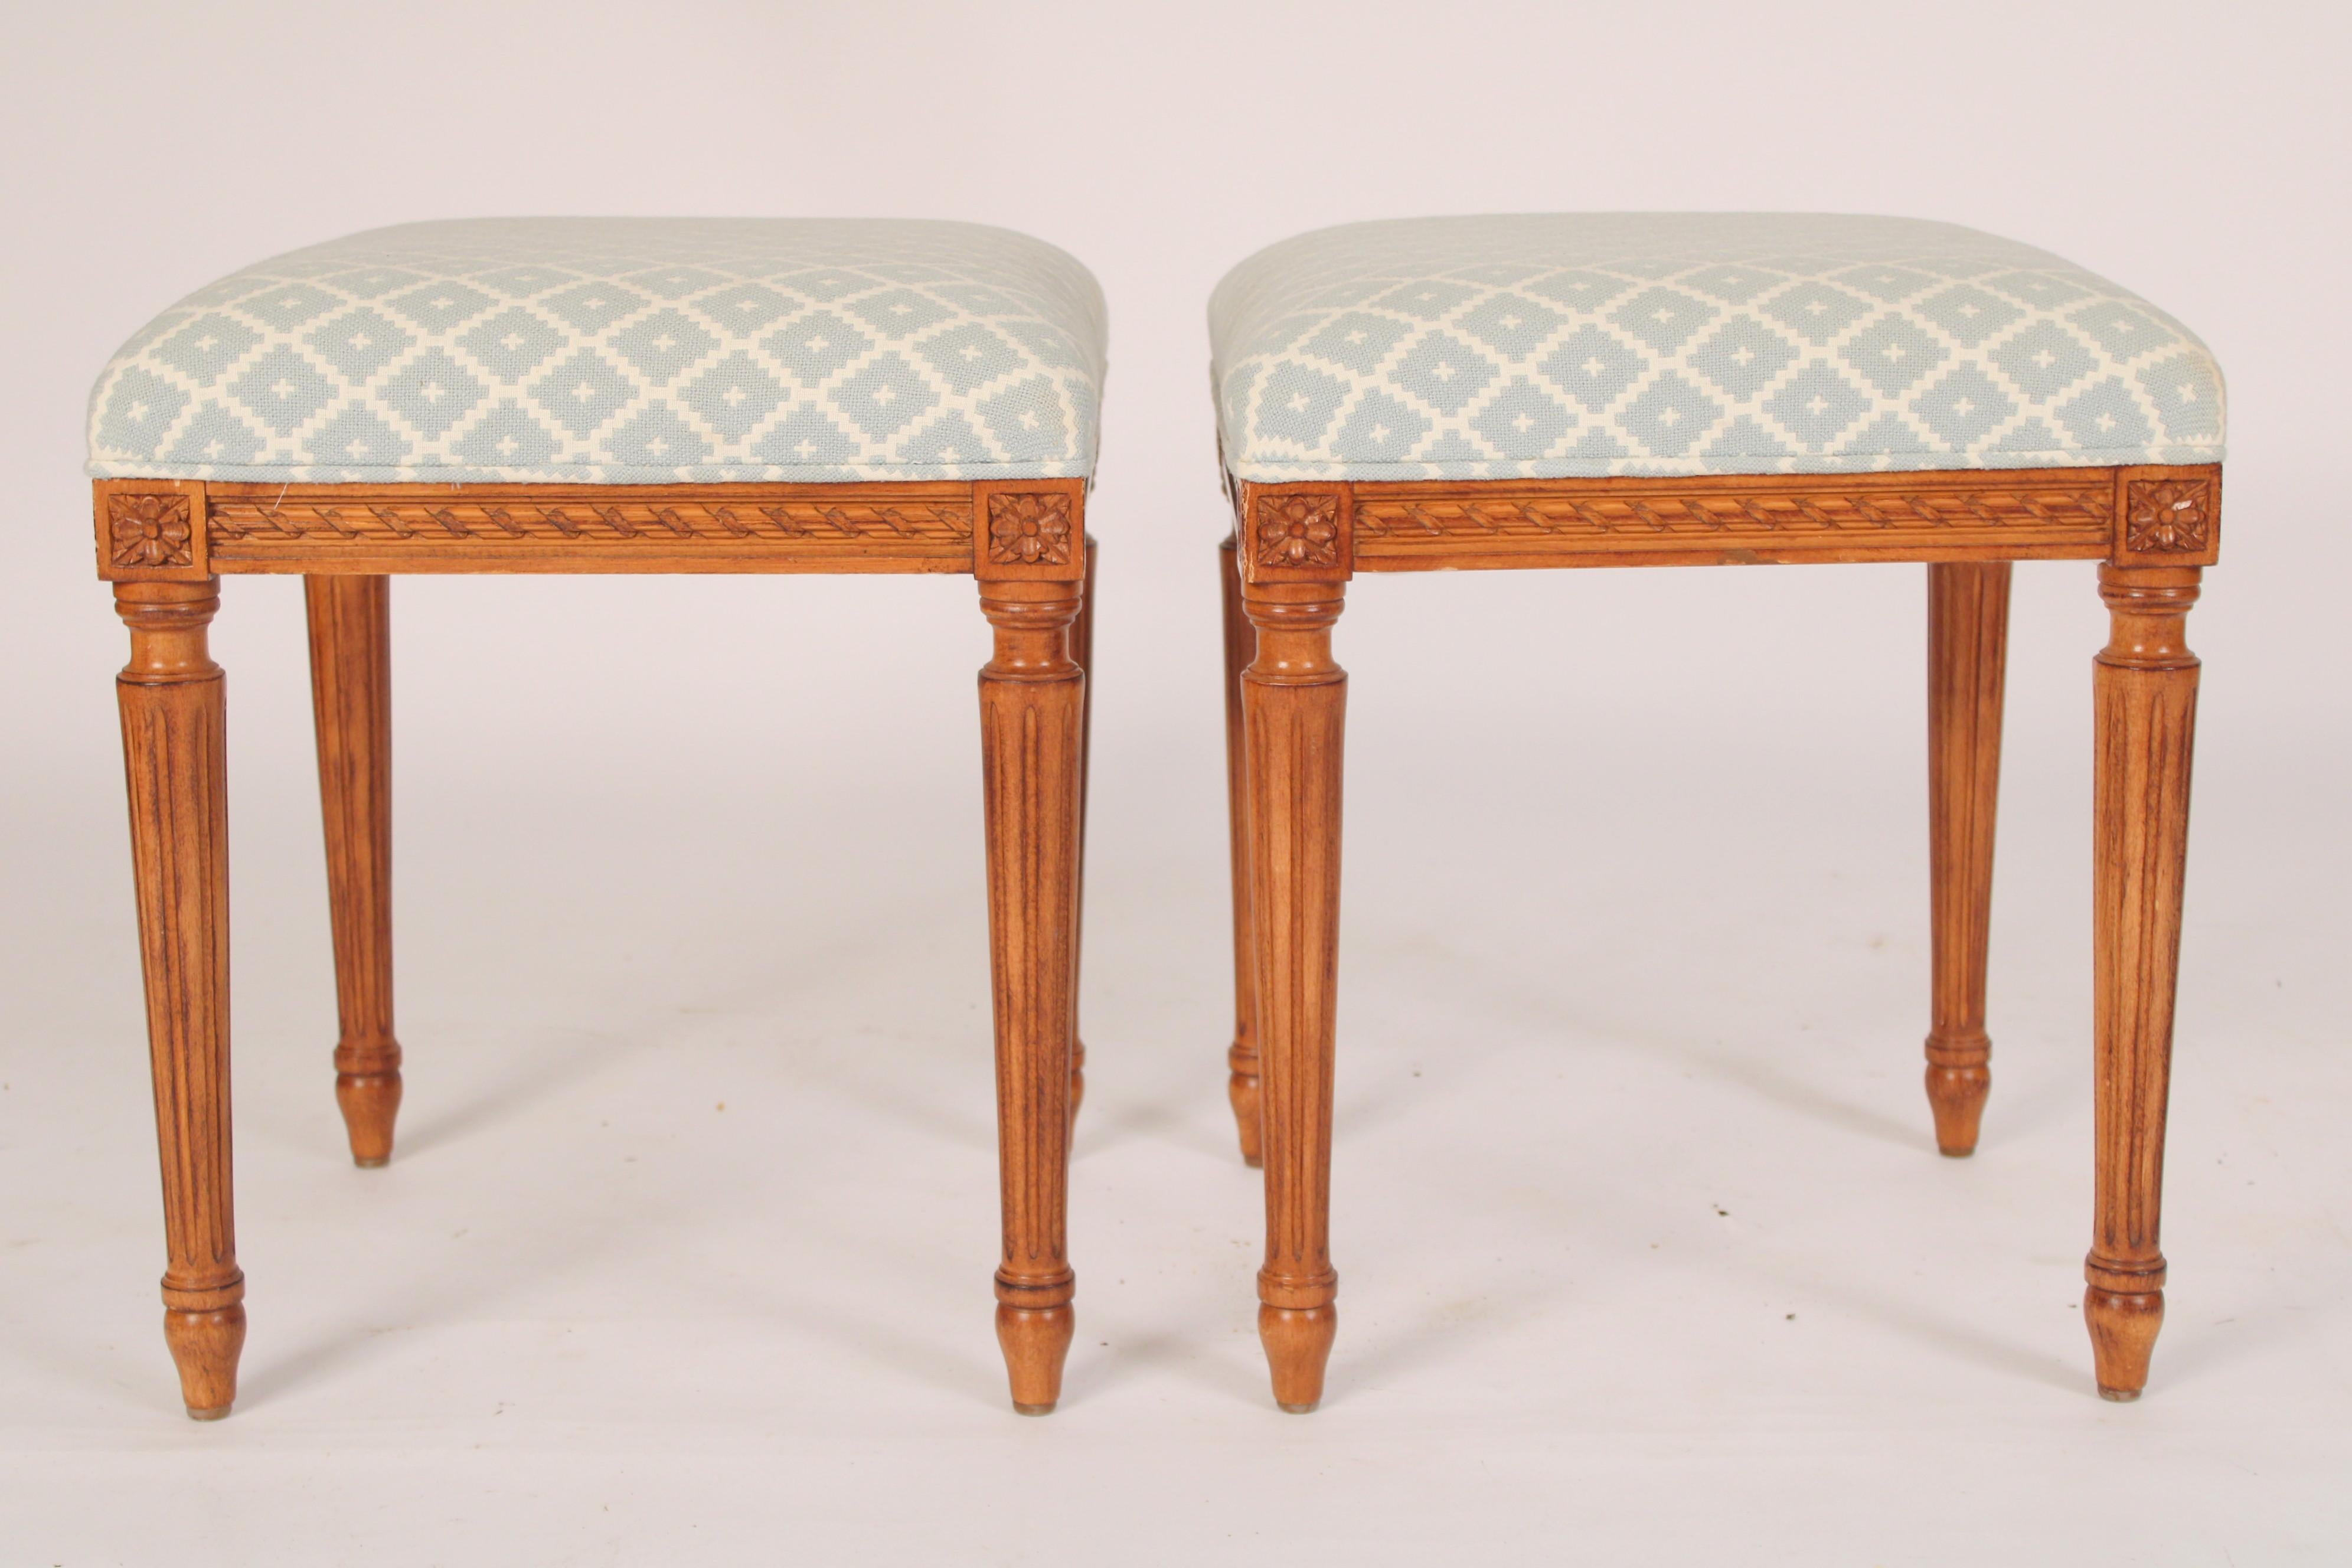 Pair of Louis XVI style carved beech wood benches, circa mid 20th century. Recently re upholstered.